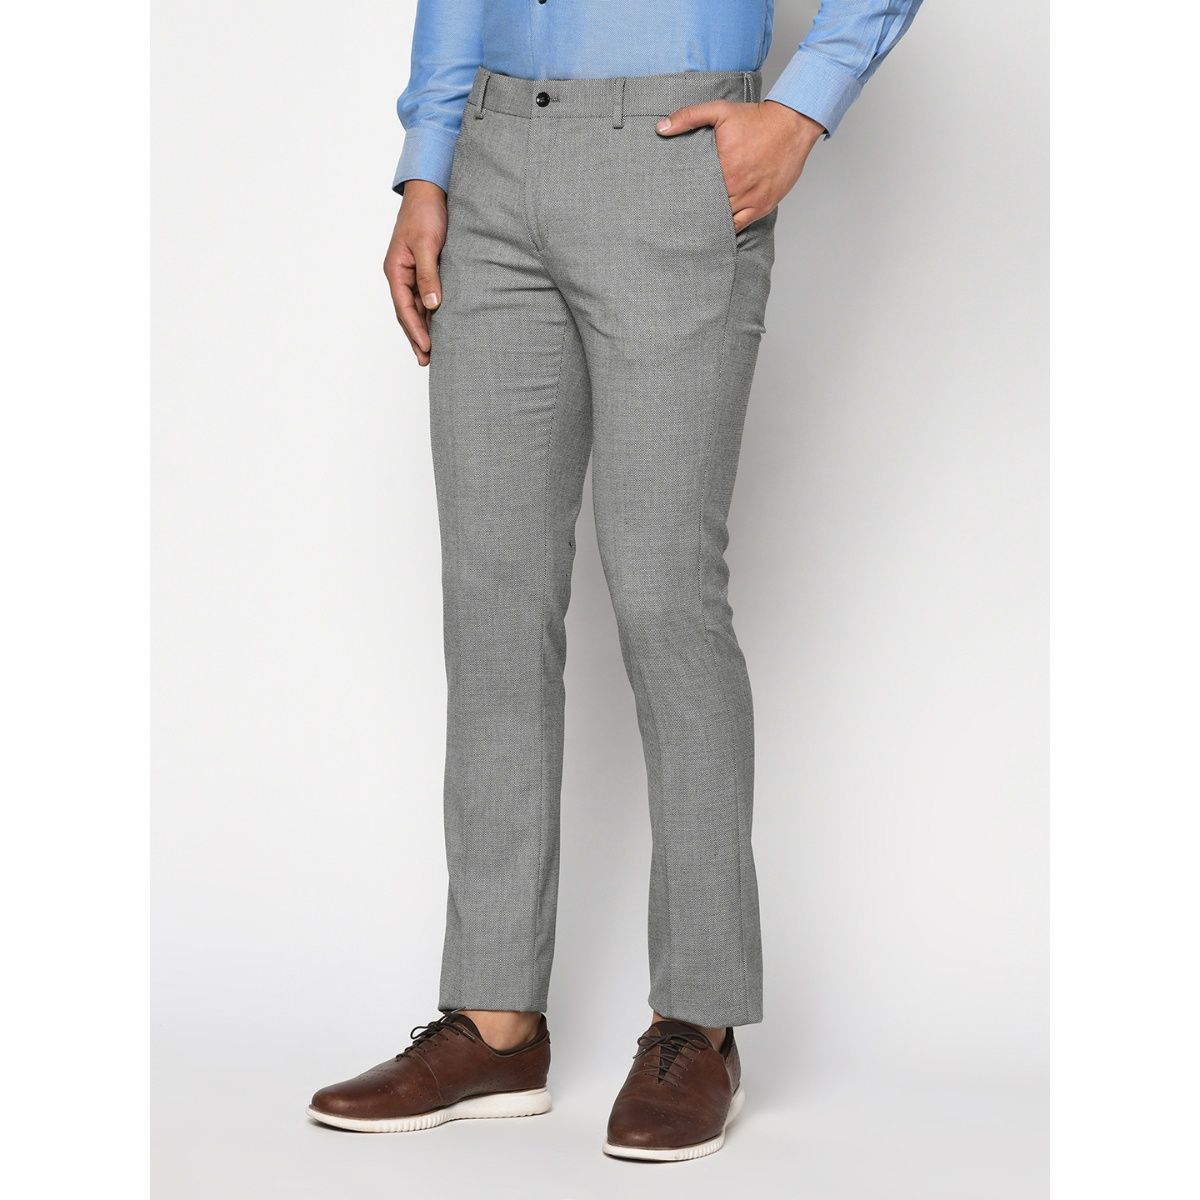 Blackberrys Tapered Fit Trousers - Buy Blackberrys Tapered Fit Trousers  online in India